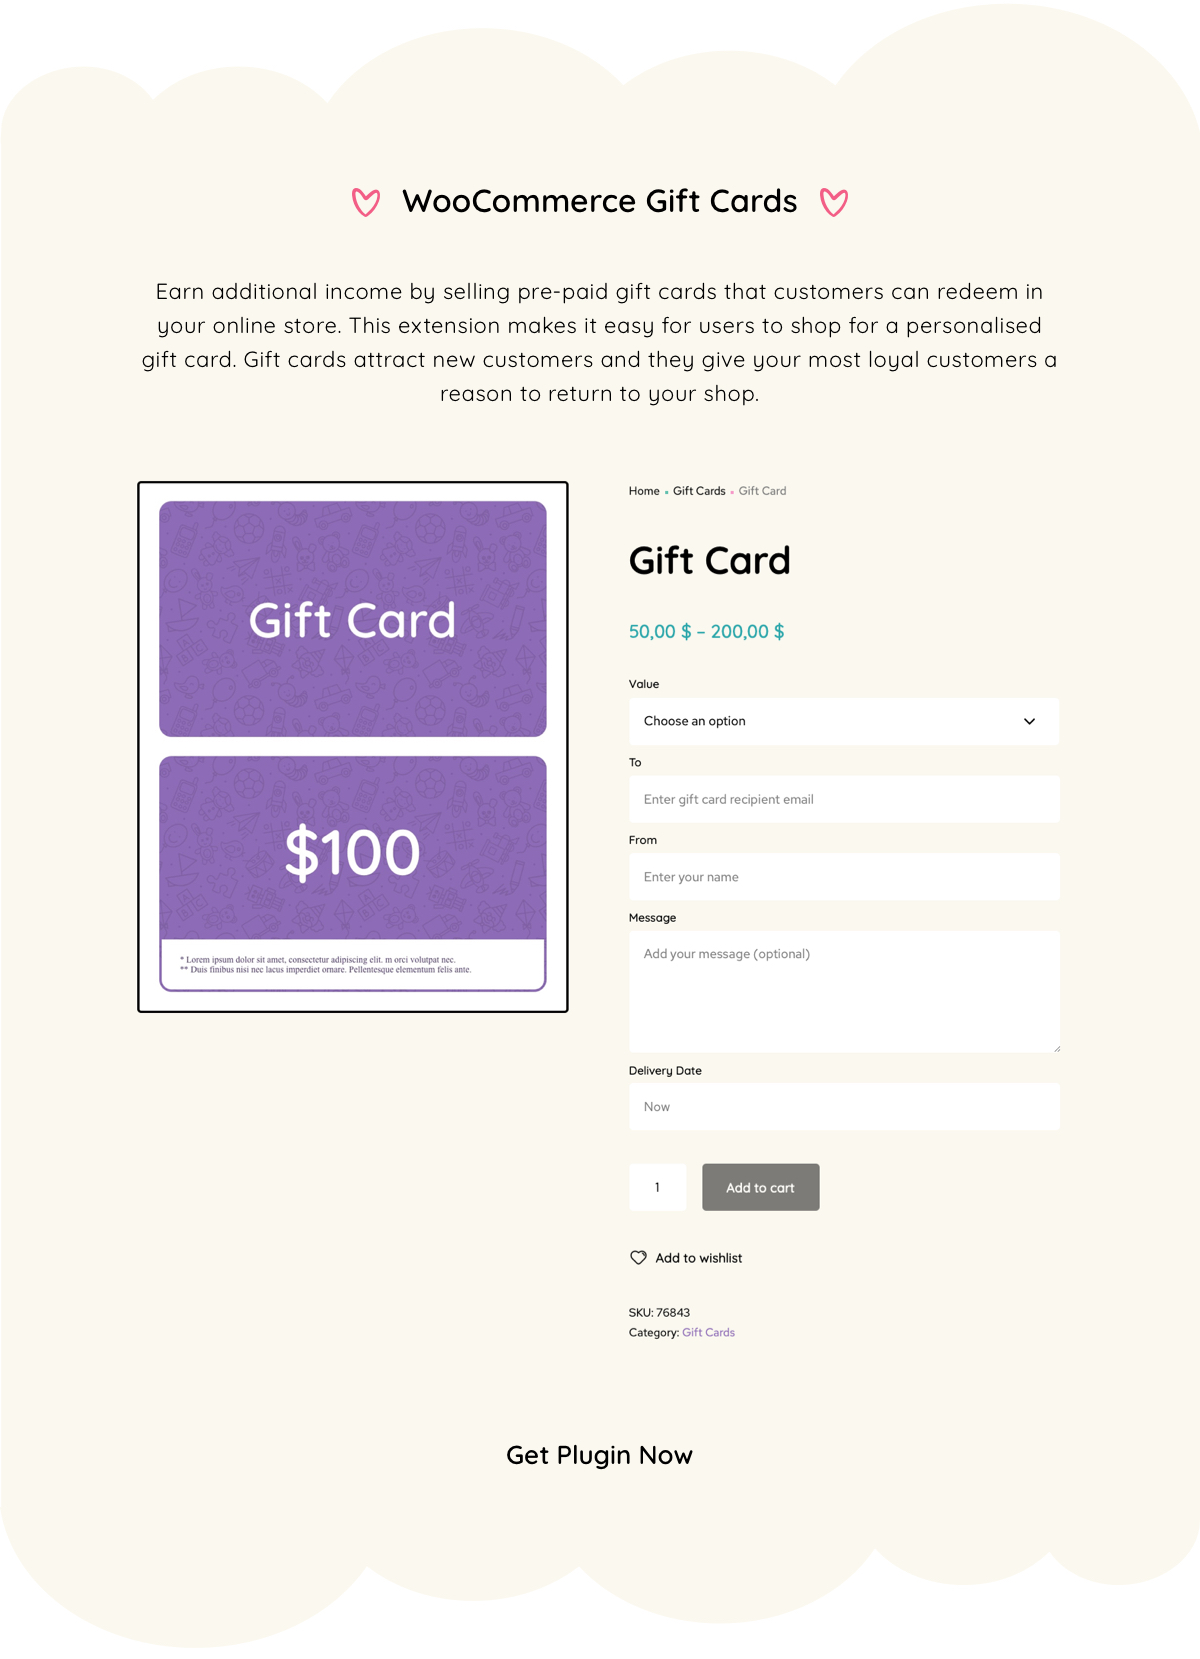 Treehouse – WooCommerce Gift Cards